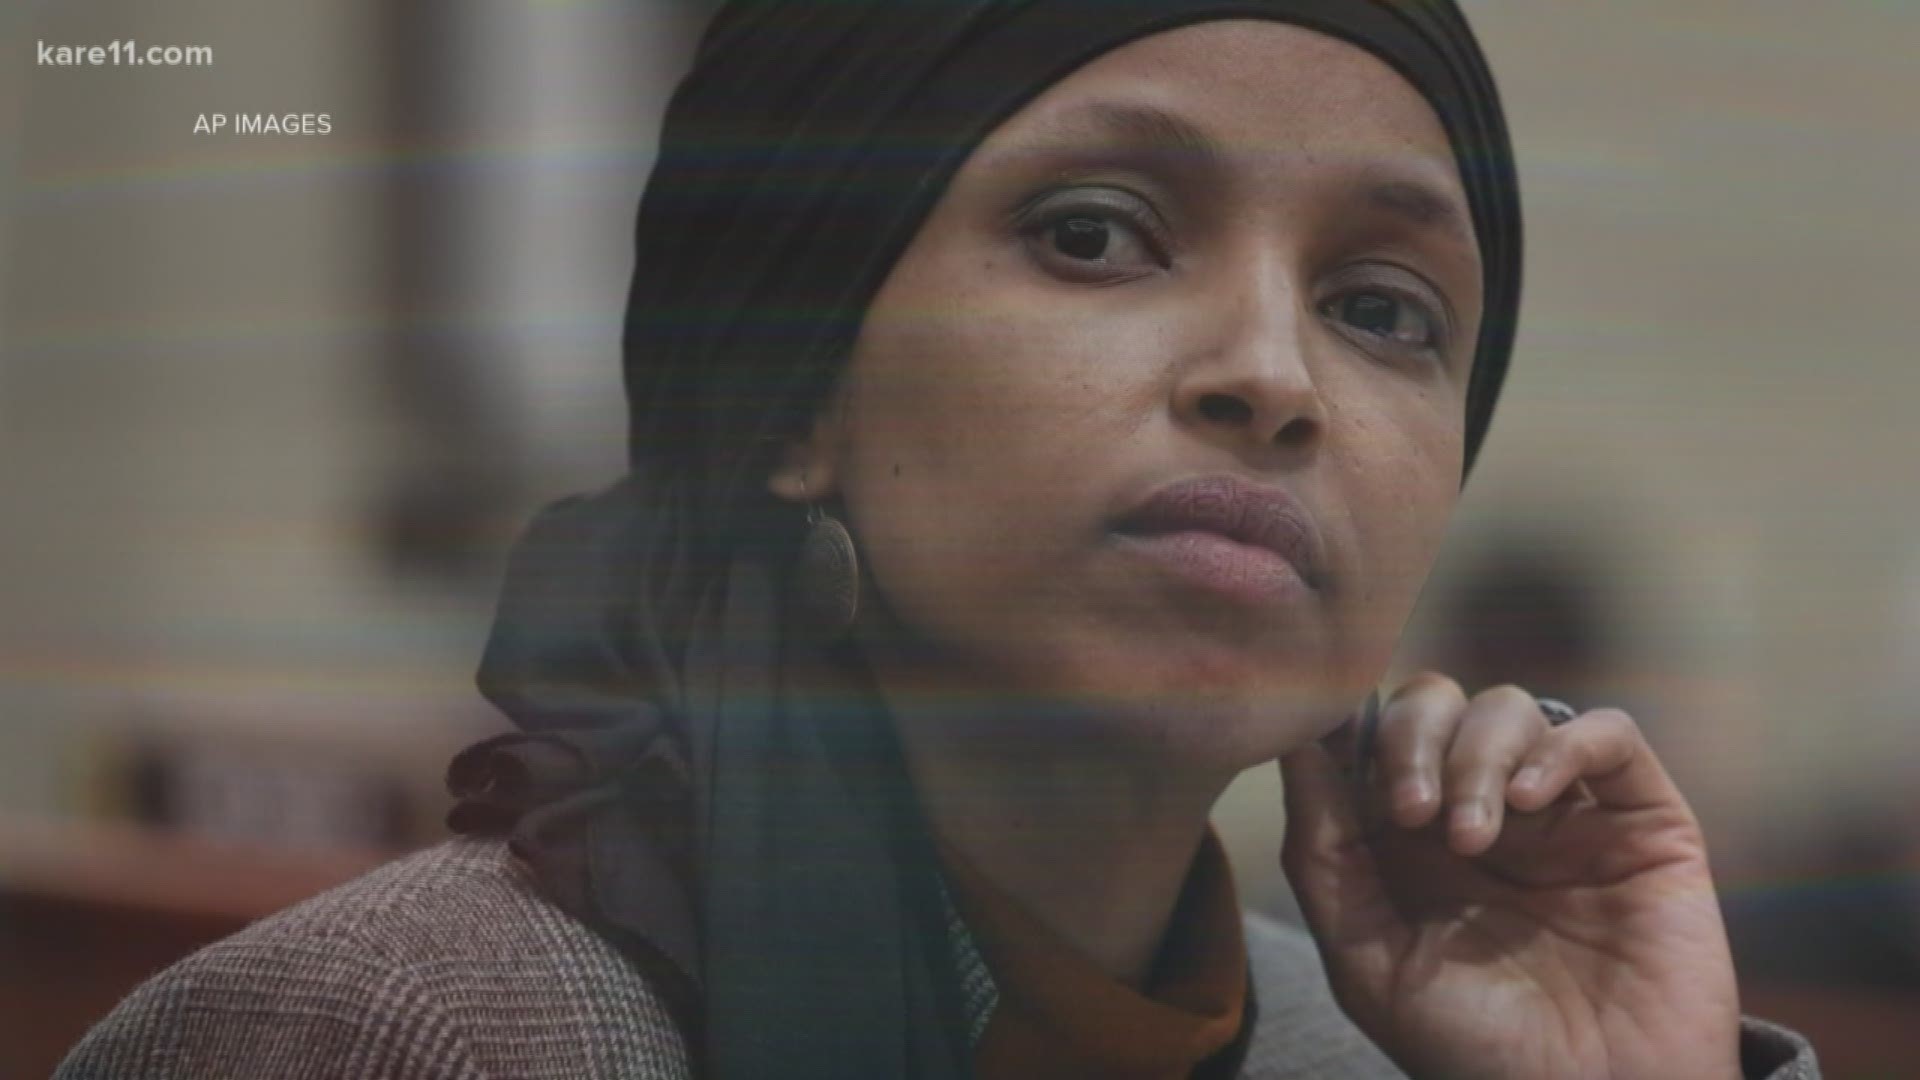 There's growing controversy surrounding Minnesota Congresswoman Ilhan Omar including today's cover of the New York Post, calling out the Democrat for recent comments about 9/11. But does she deserve it? https://kare11.tv/2D7F1pk